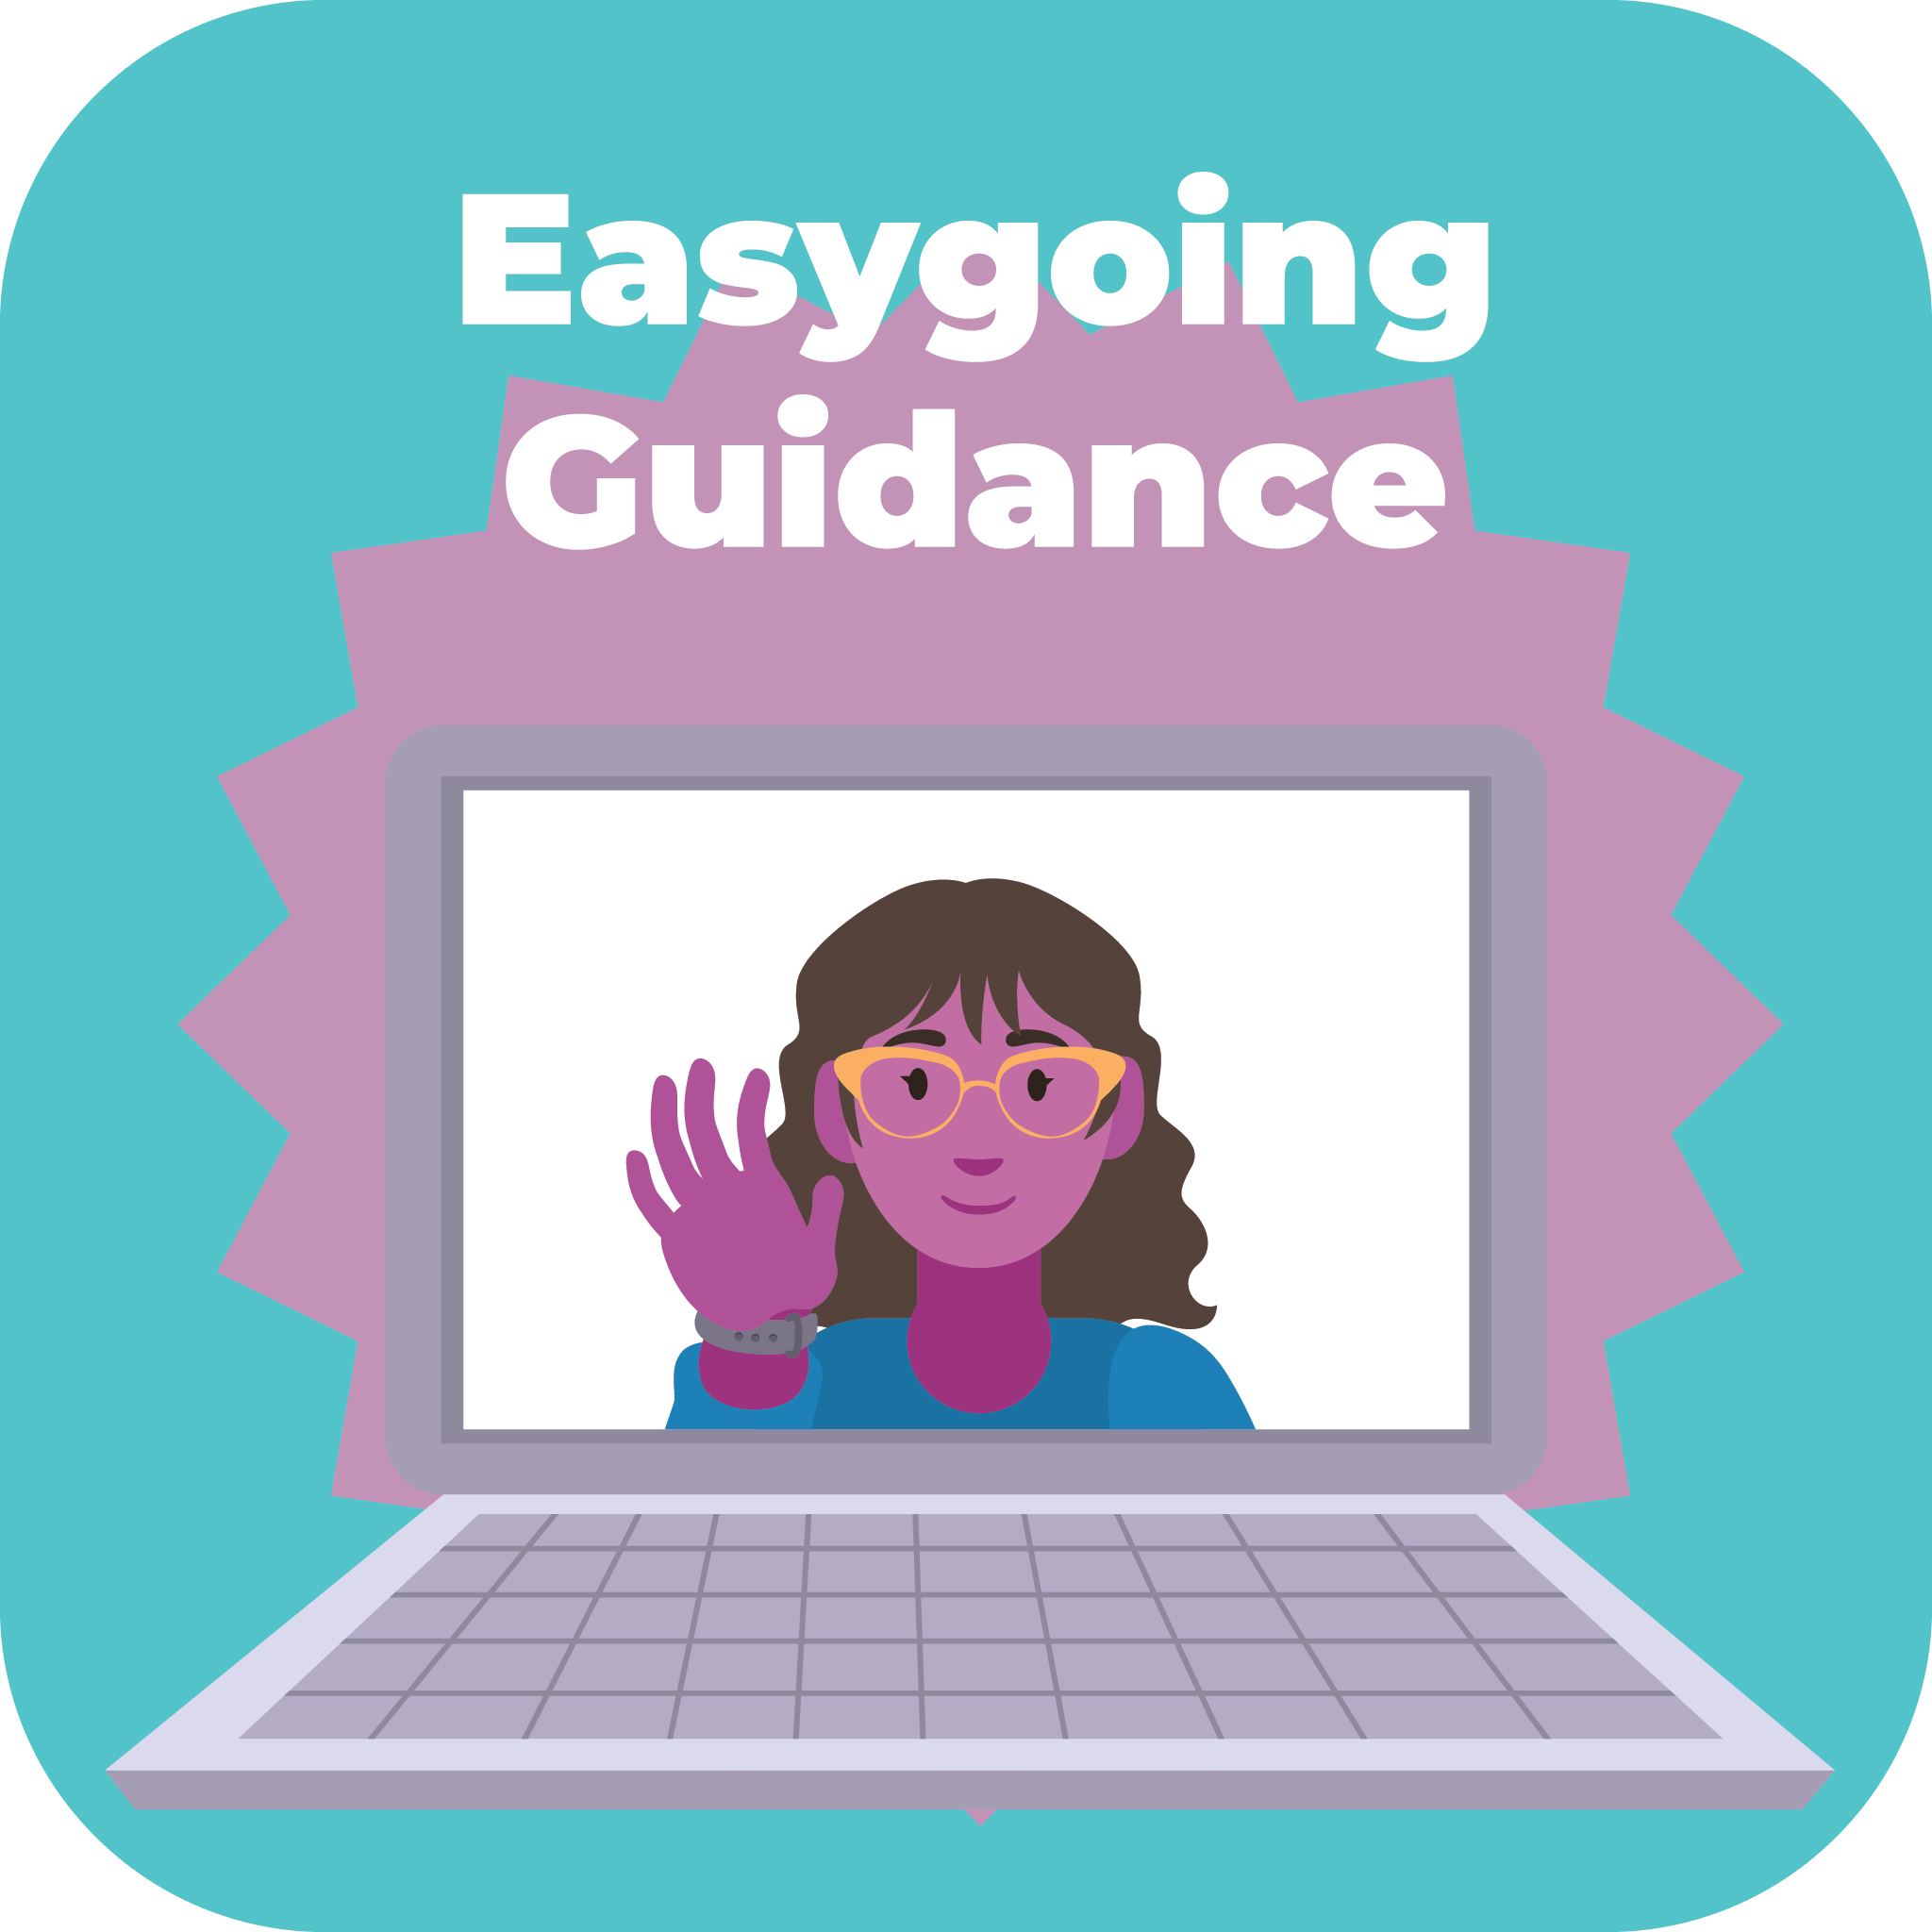 Easygoing guidance with a woman on a laptop.